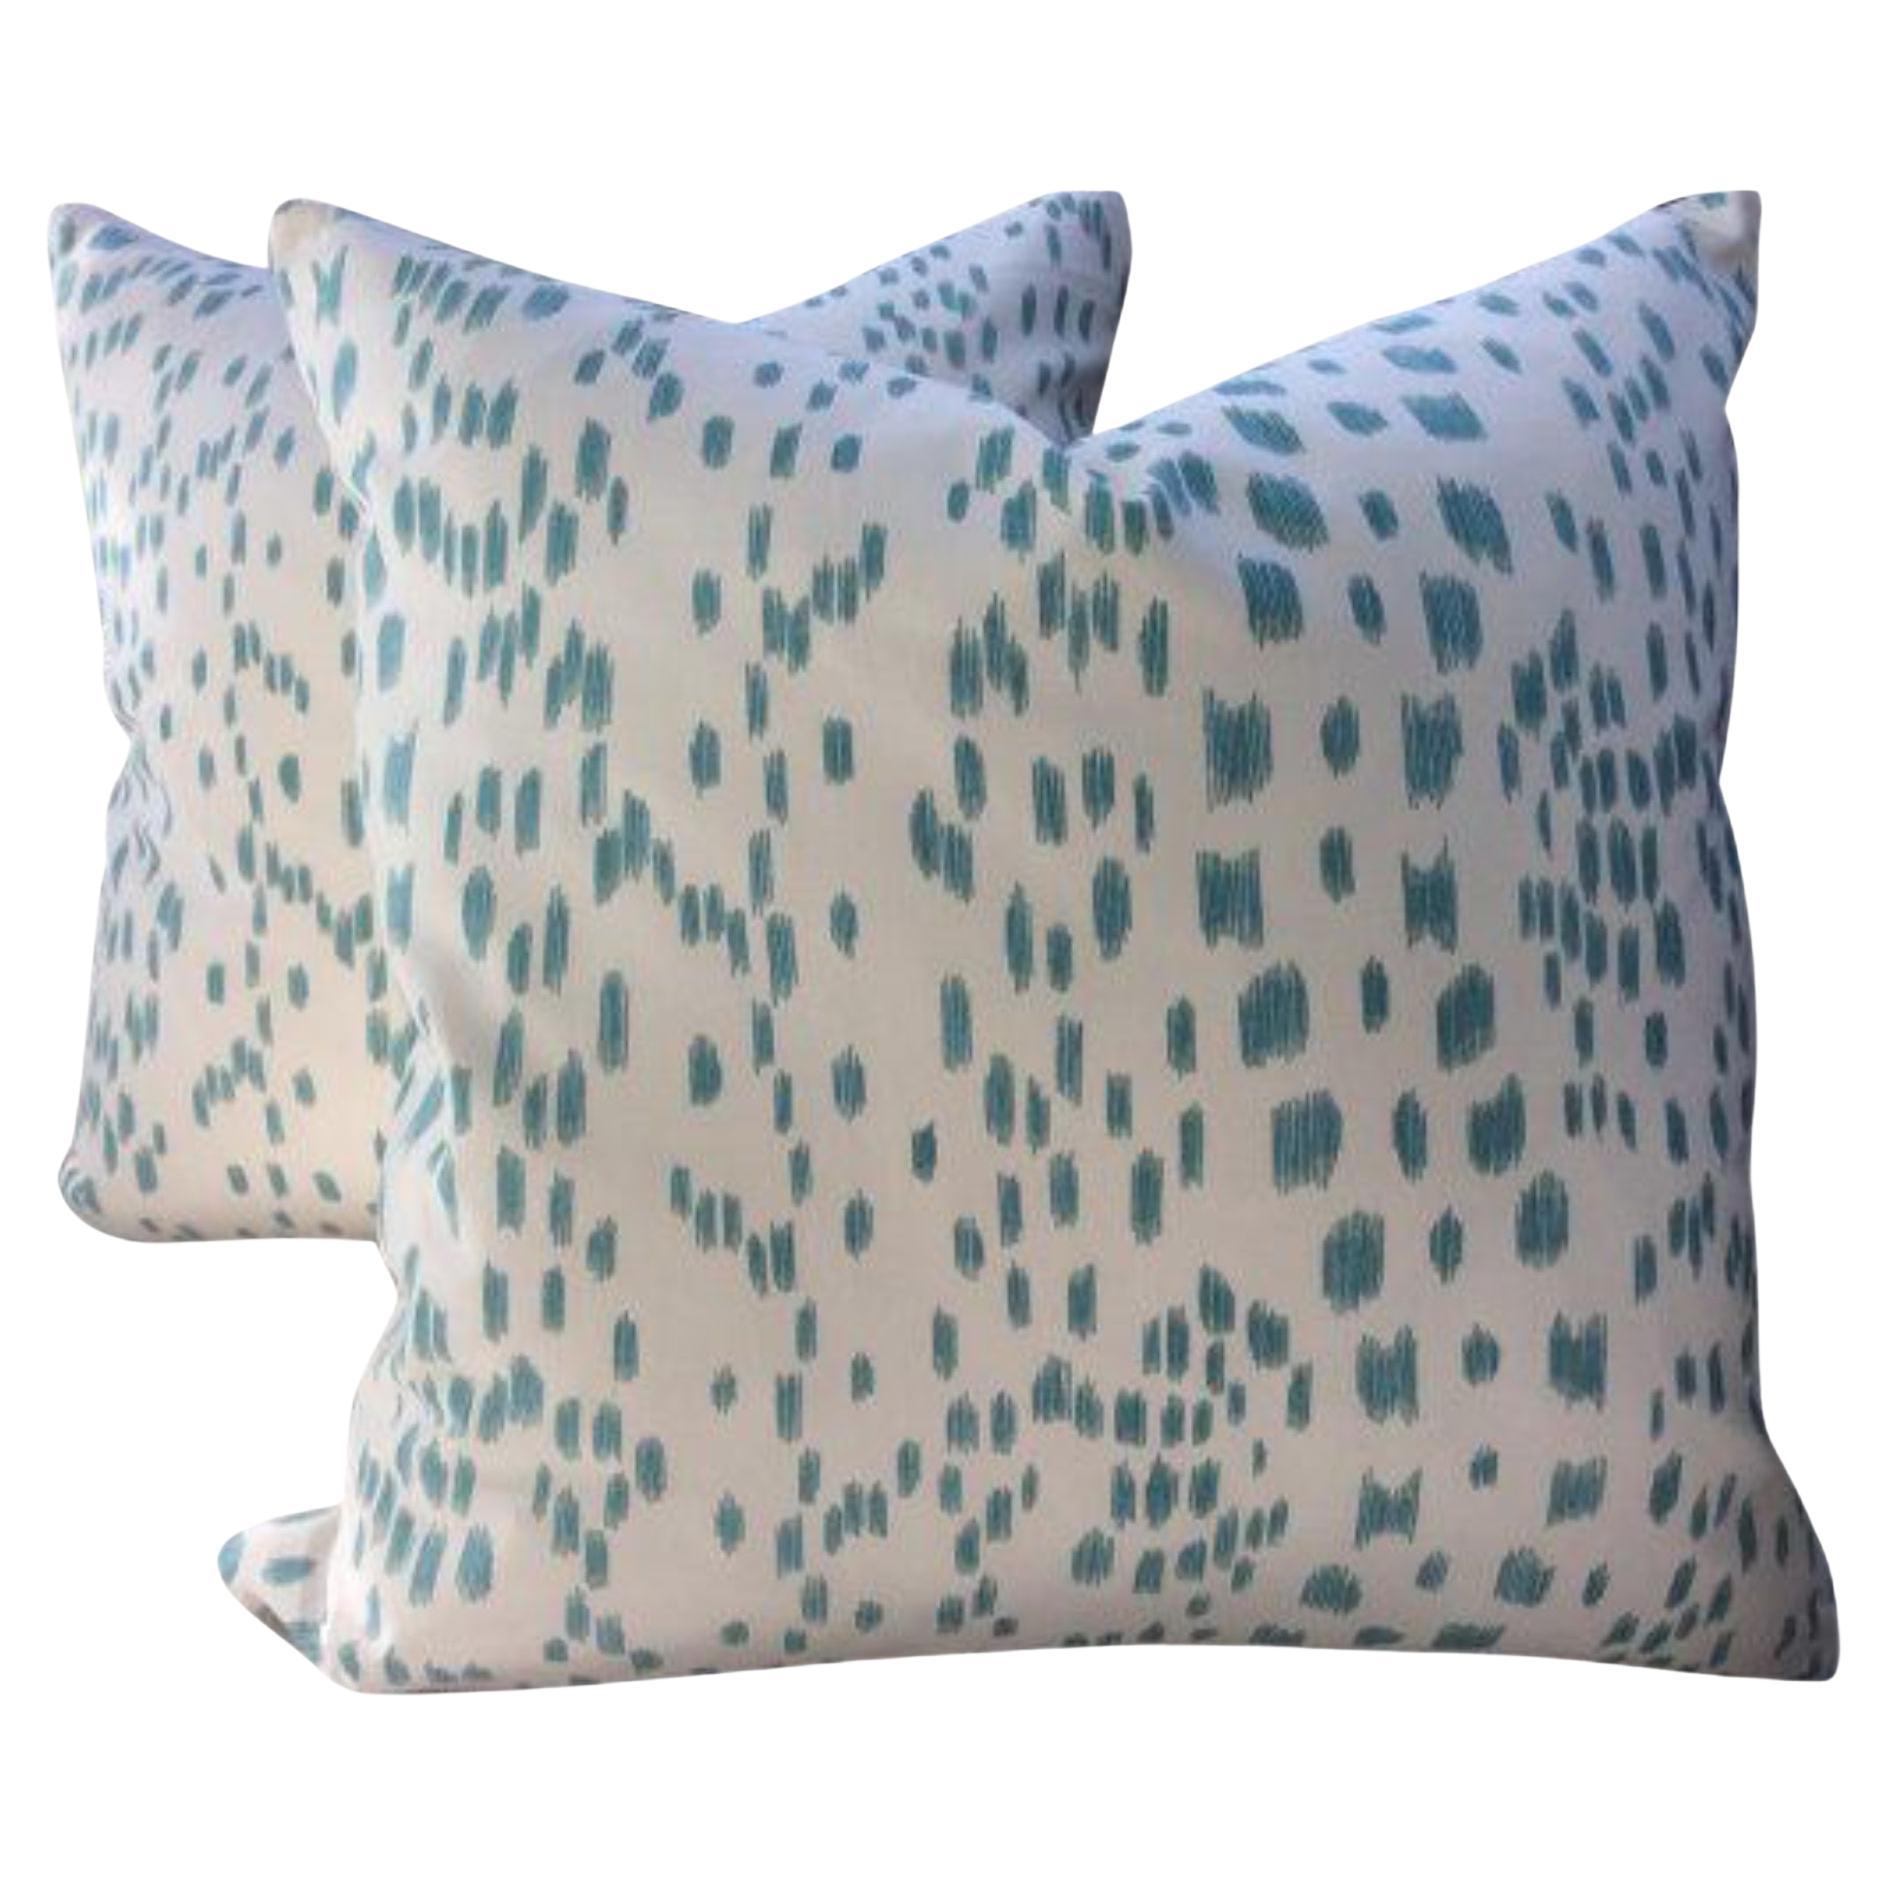 Brunschwig & Fils Pillows in Les Touches Aqua and Cream Cotton - a Pair For Sale